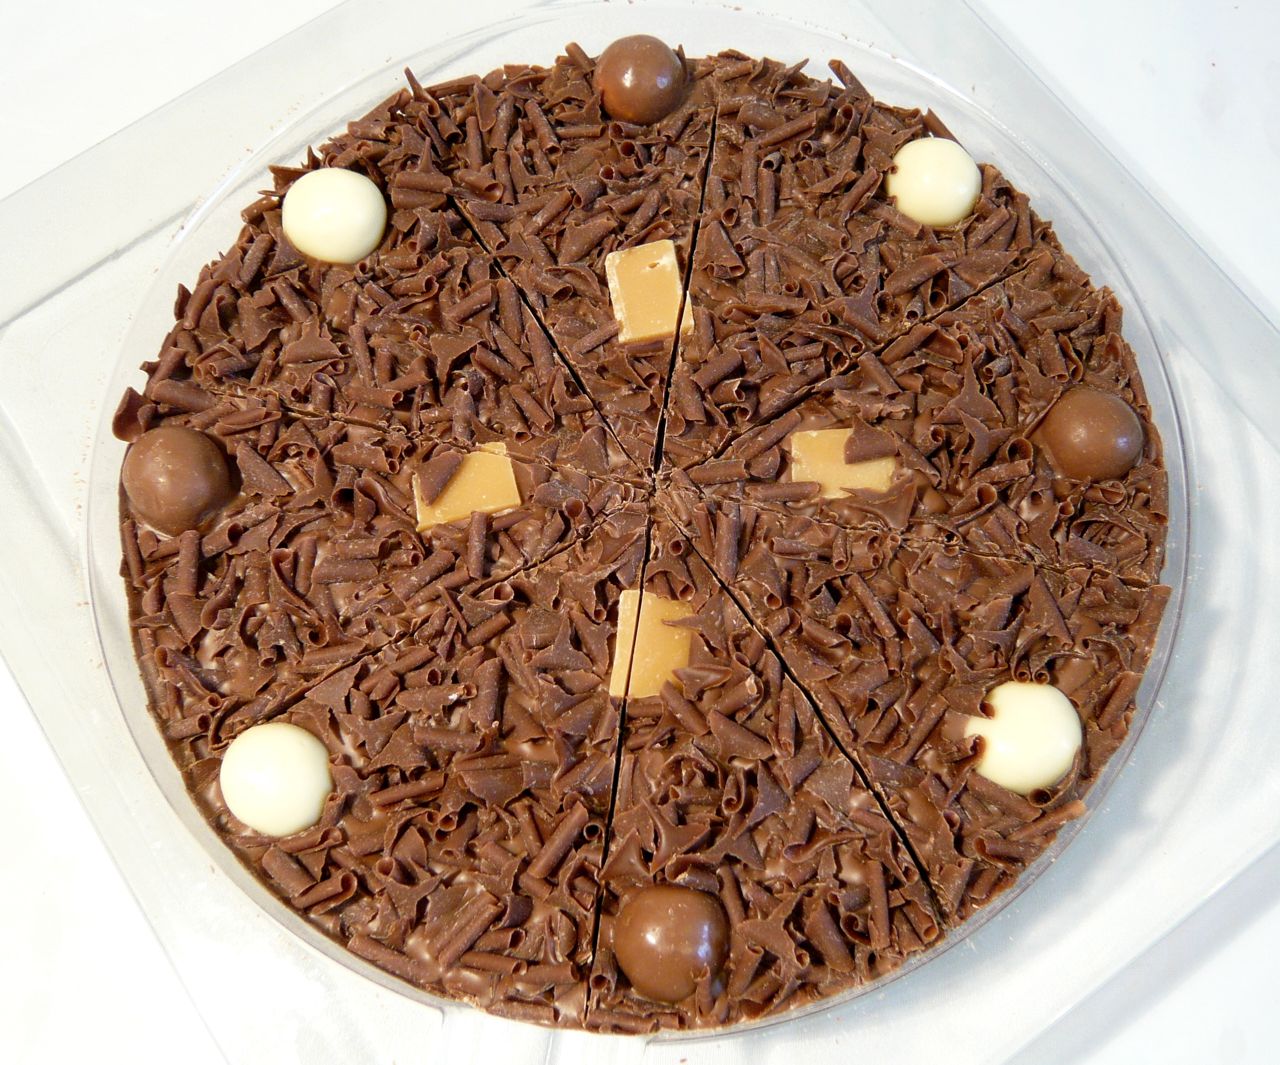 Unique Gourmet Chocolate Specialty - Chocolate Pizza Company